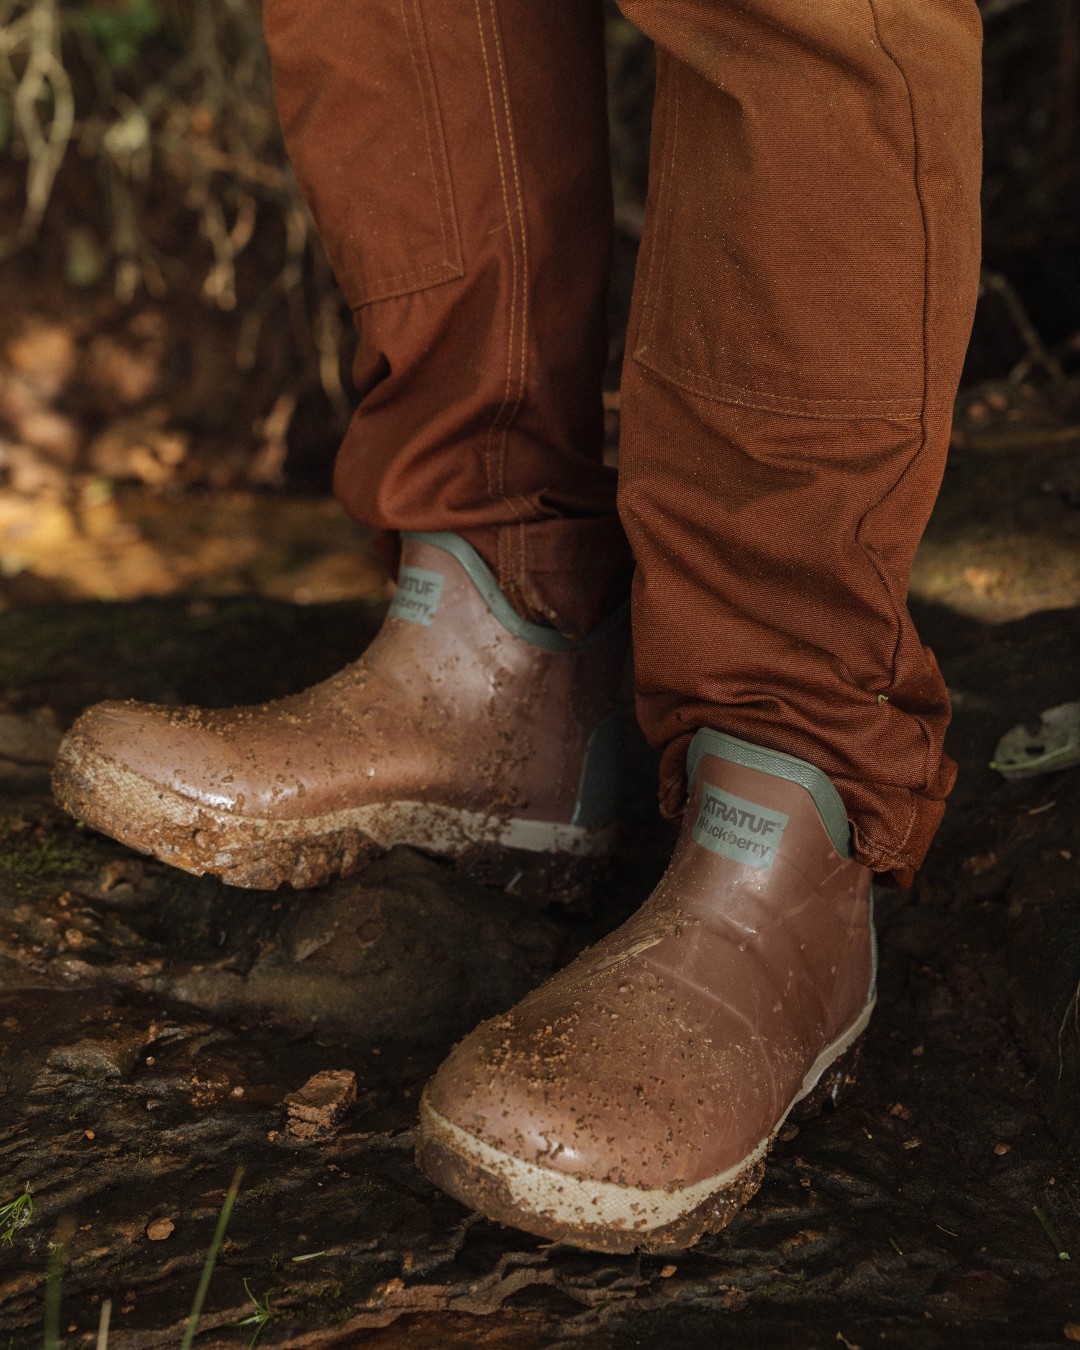 Huckberry on X: Hello, world. Meet the all-new Legacy Chelsea Boot—an  overbuilt update of one of XTRATUF's OG commercial fishing boots from way  back in the day. Exclusively available at Huckberry now.